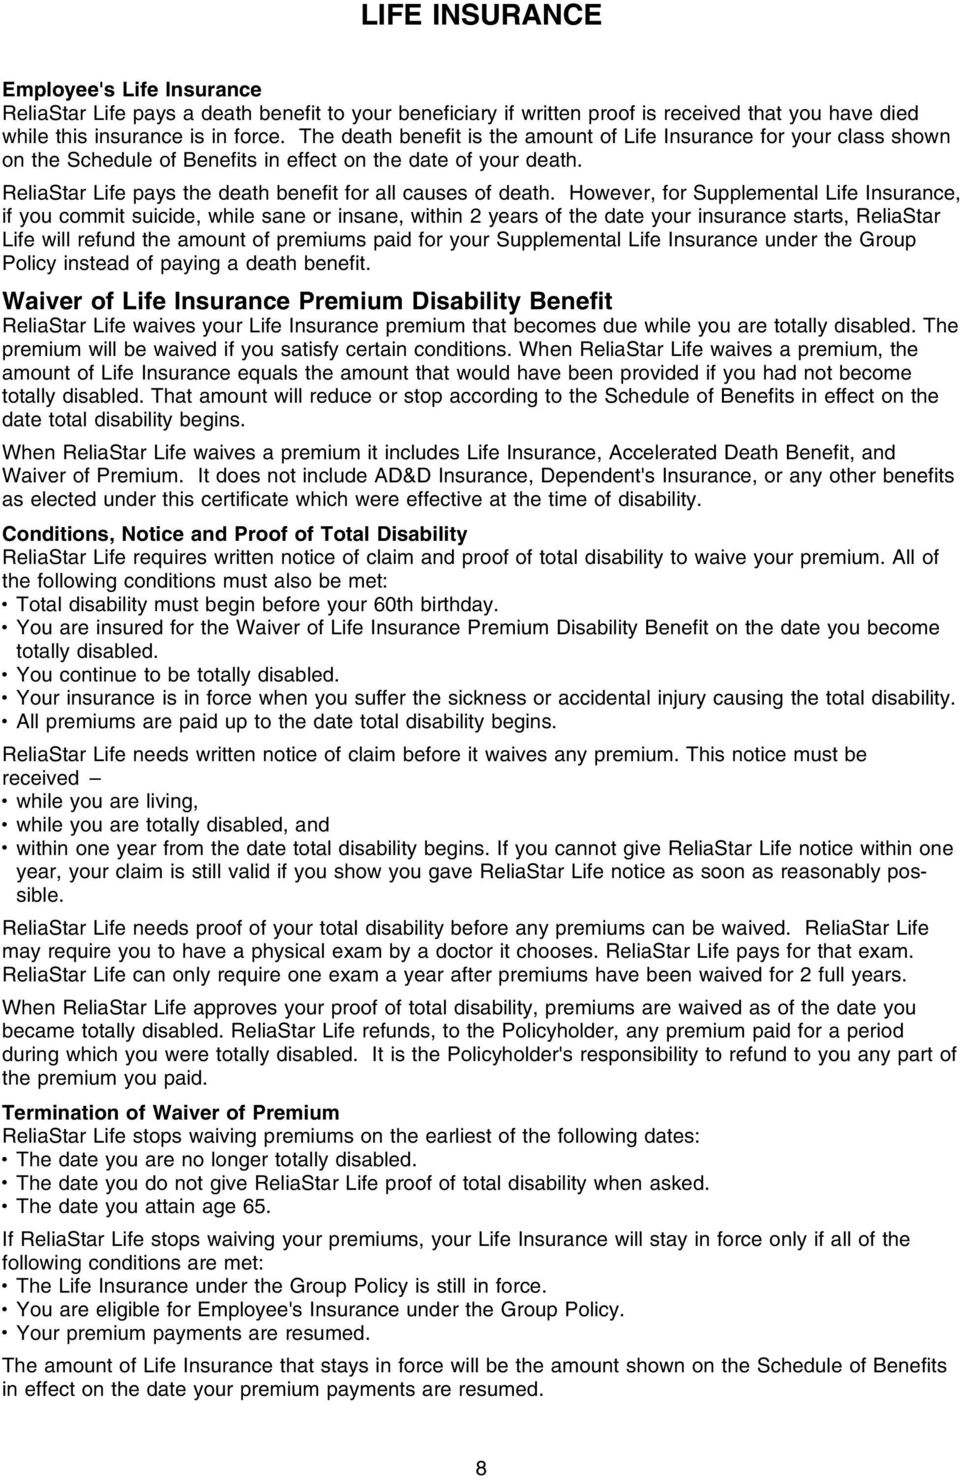 However, for Supplemental Life Insurance, if you commit suicide, while sane or insane, within 2 years of the date your insurance starts, ReliaStar Life will refund the amount of premiums paid for